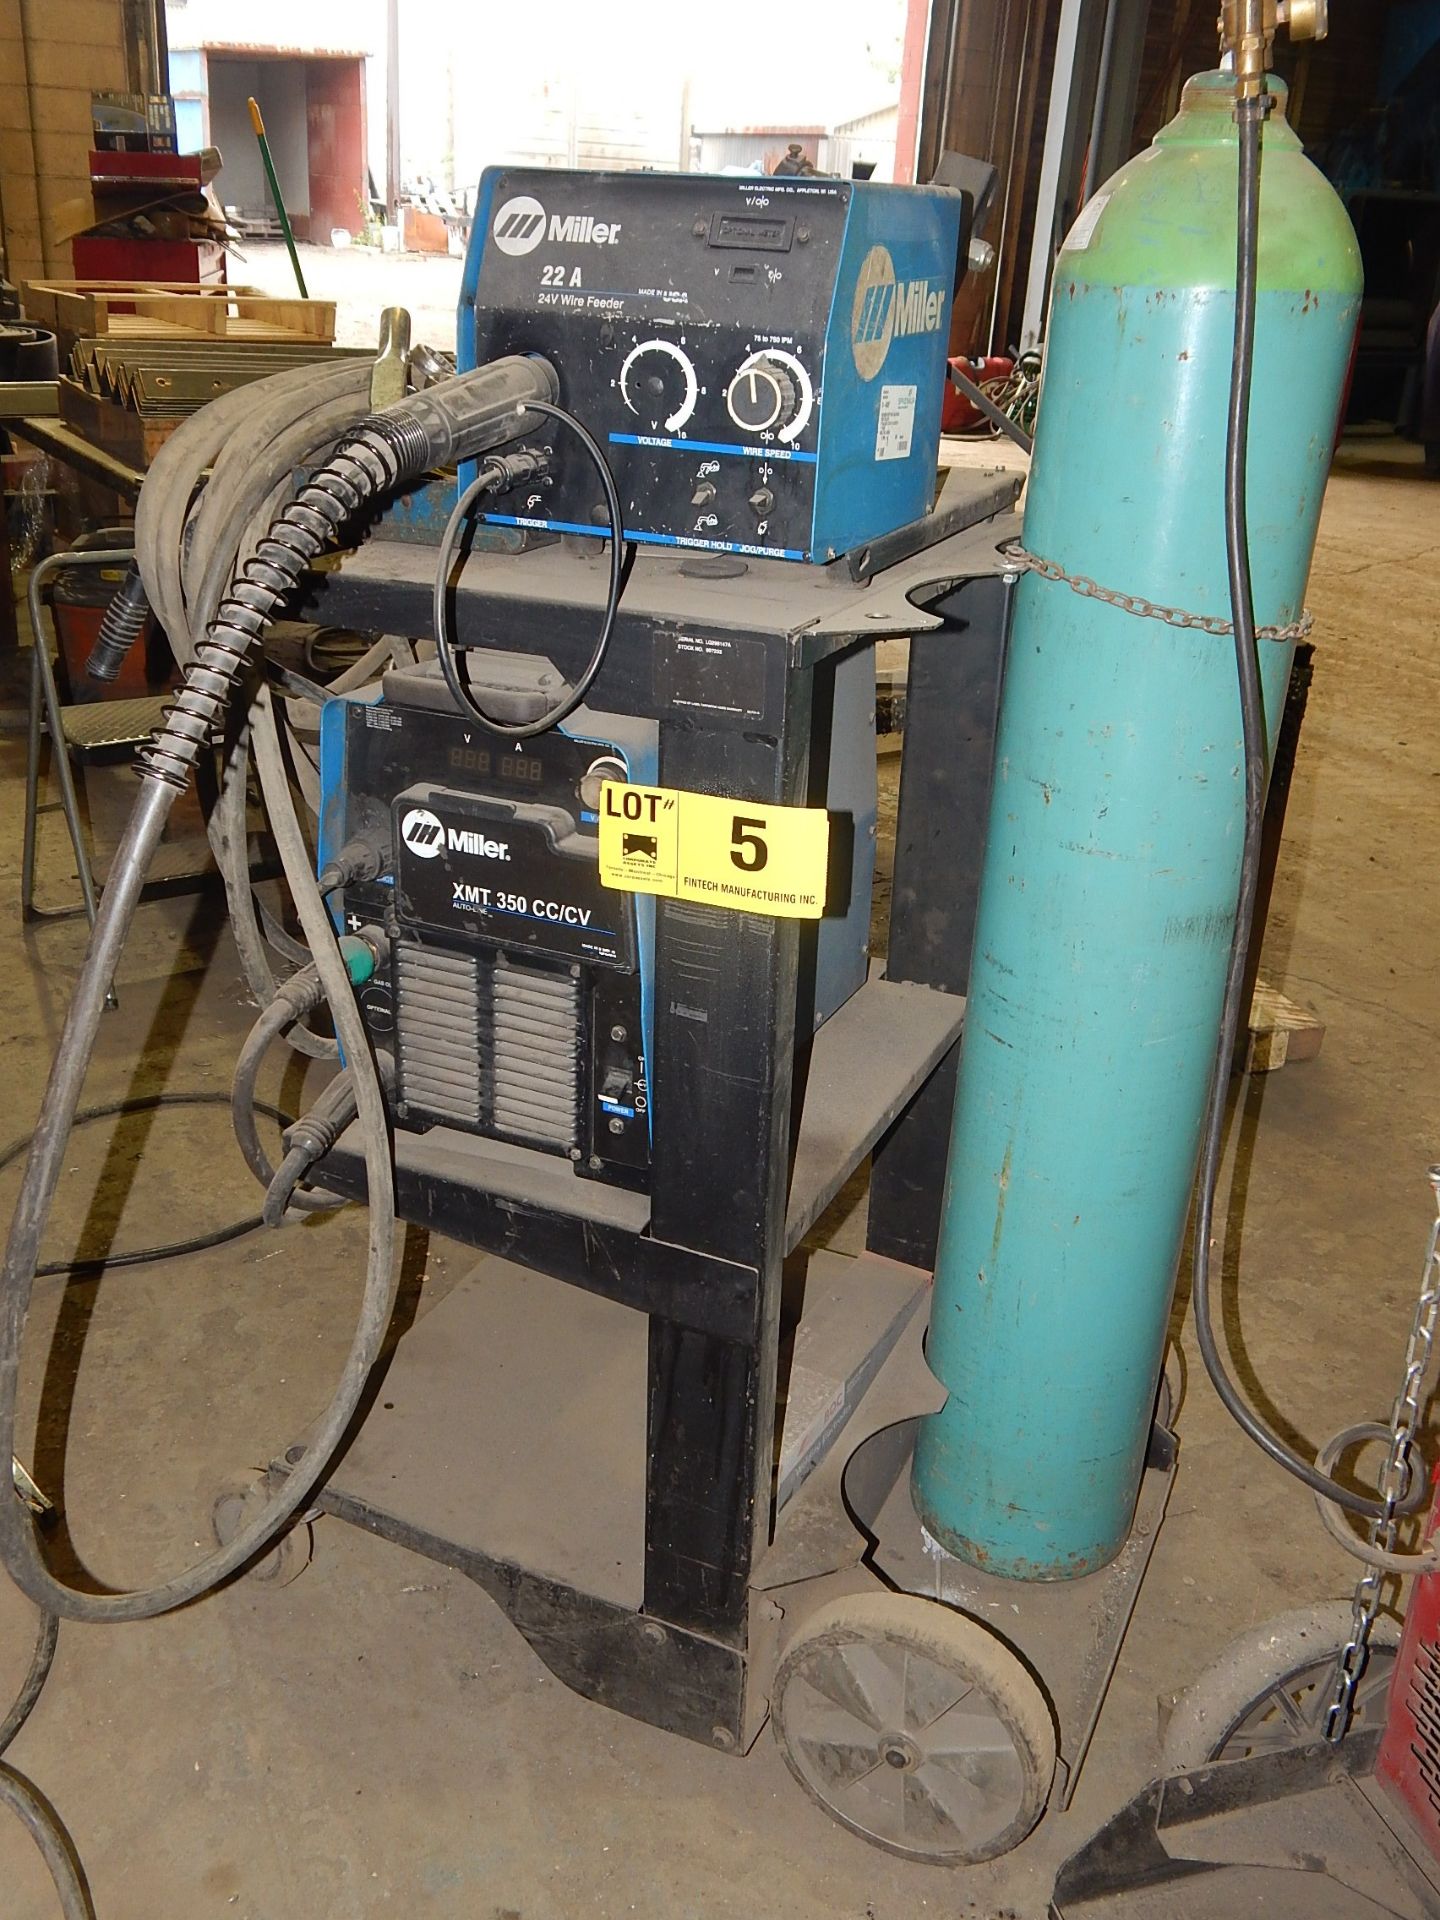 MILLER XMT 350 CC/CV DIGITAL ARC WELDER WITH MILLER 22A WIRE FEEDERS, CABLES AND GUN S/N: LG290147A